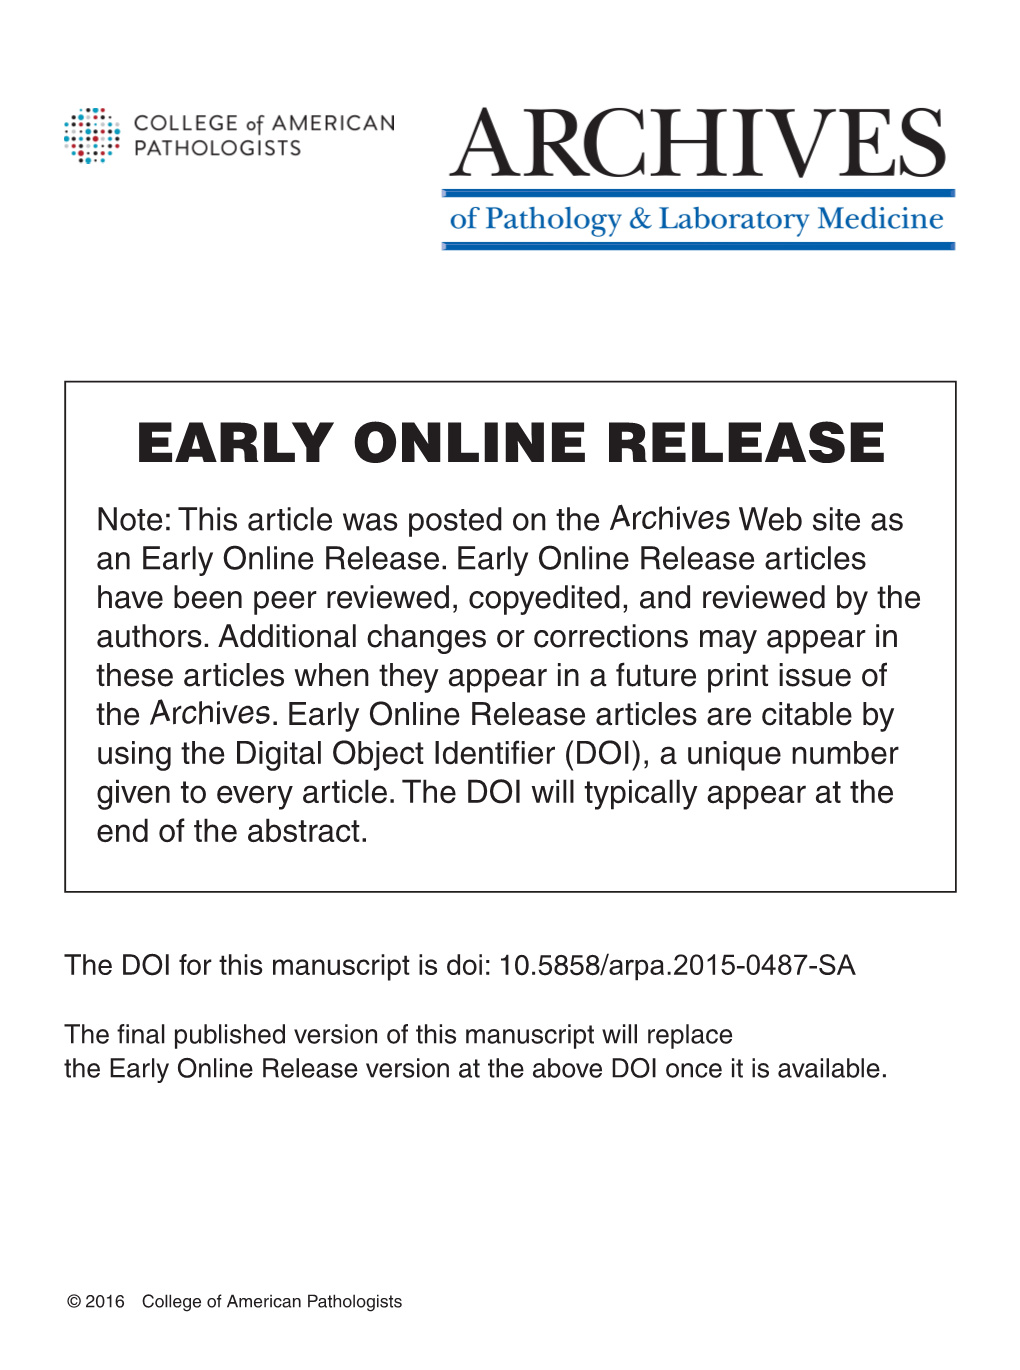 EARLY ONLINE RELEASE Note: This Article Was Posted on the Archives Web Site As an Early Online Release